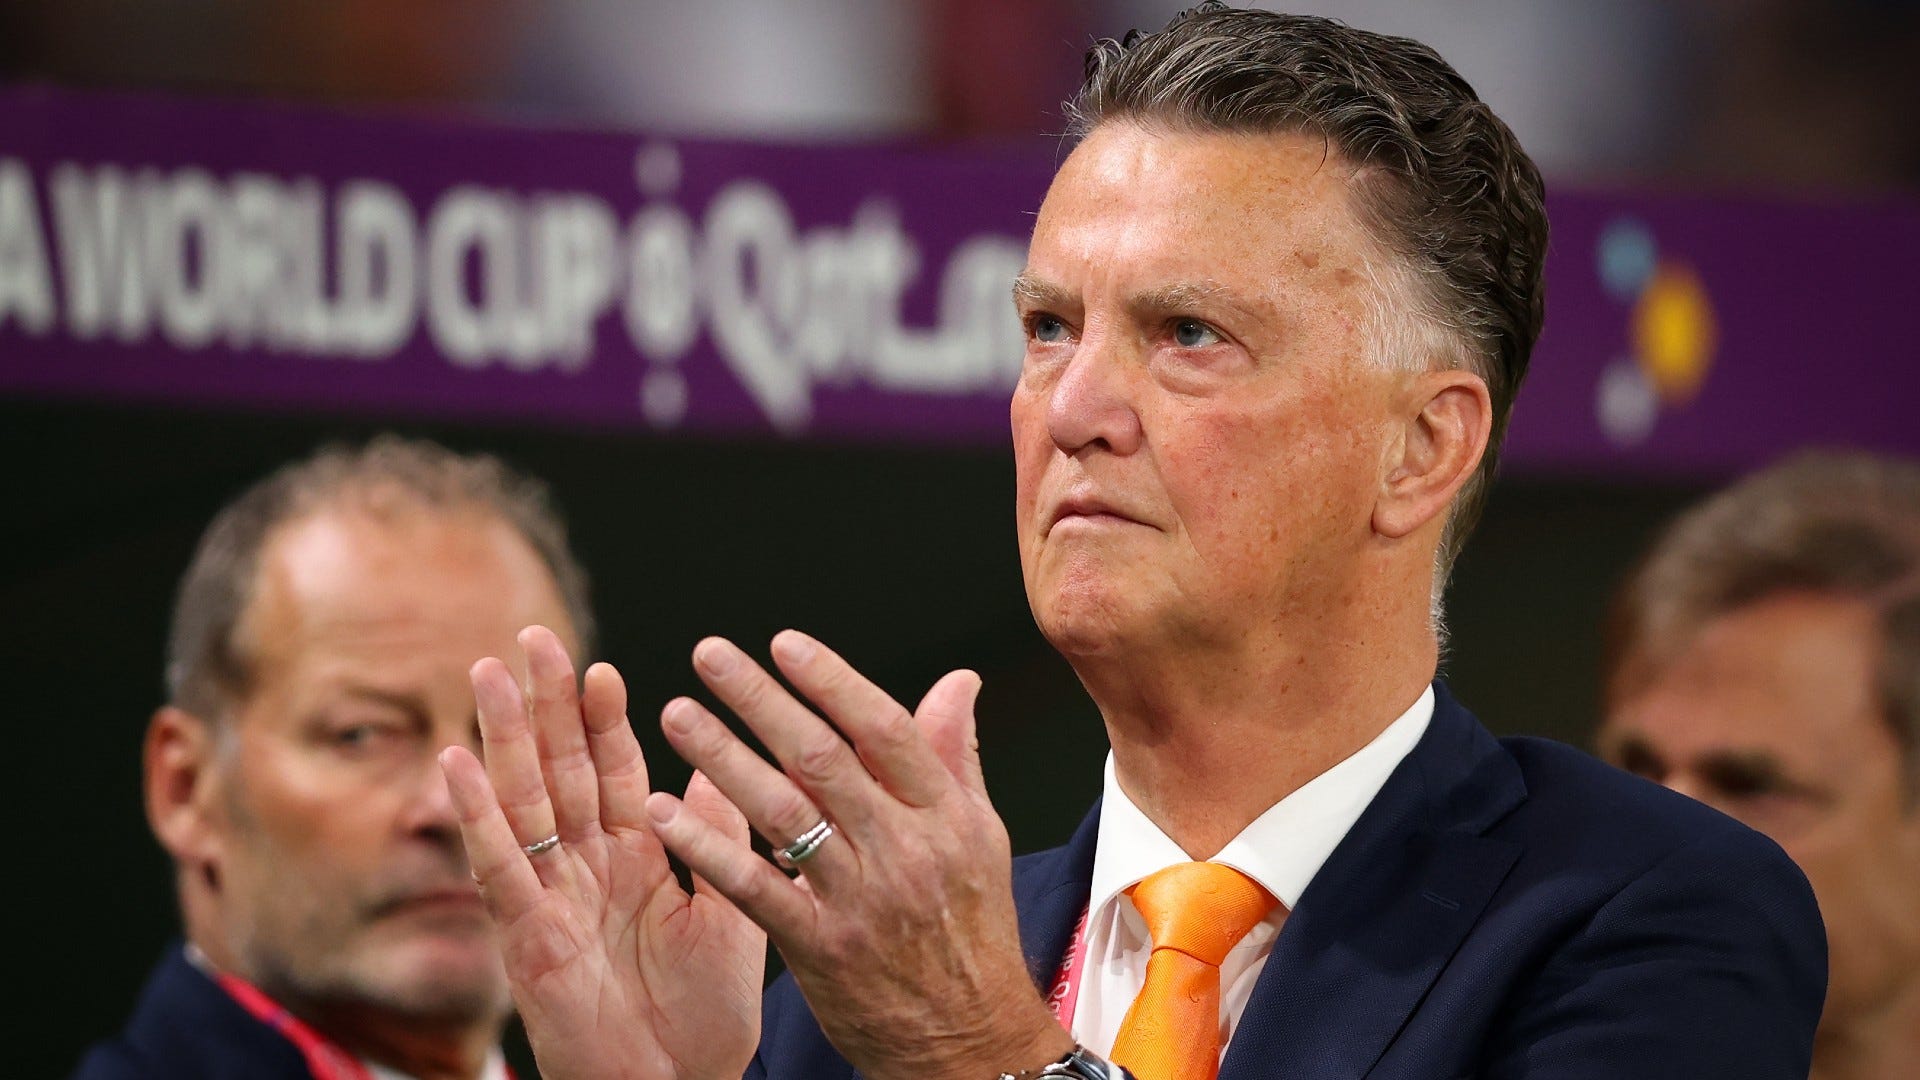 The Van Gaal effect: Why dancing Netherlands' manager's philosophy is perfectly suited to the World Cup stage | Goal.com US